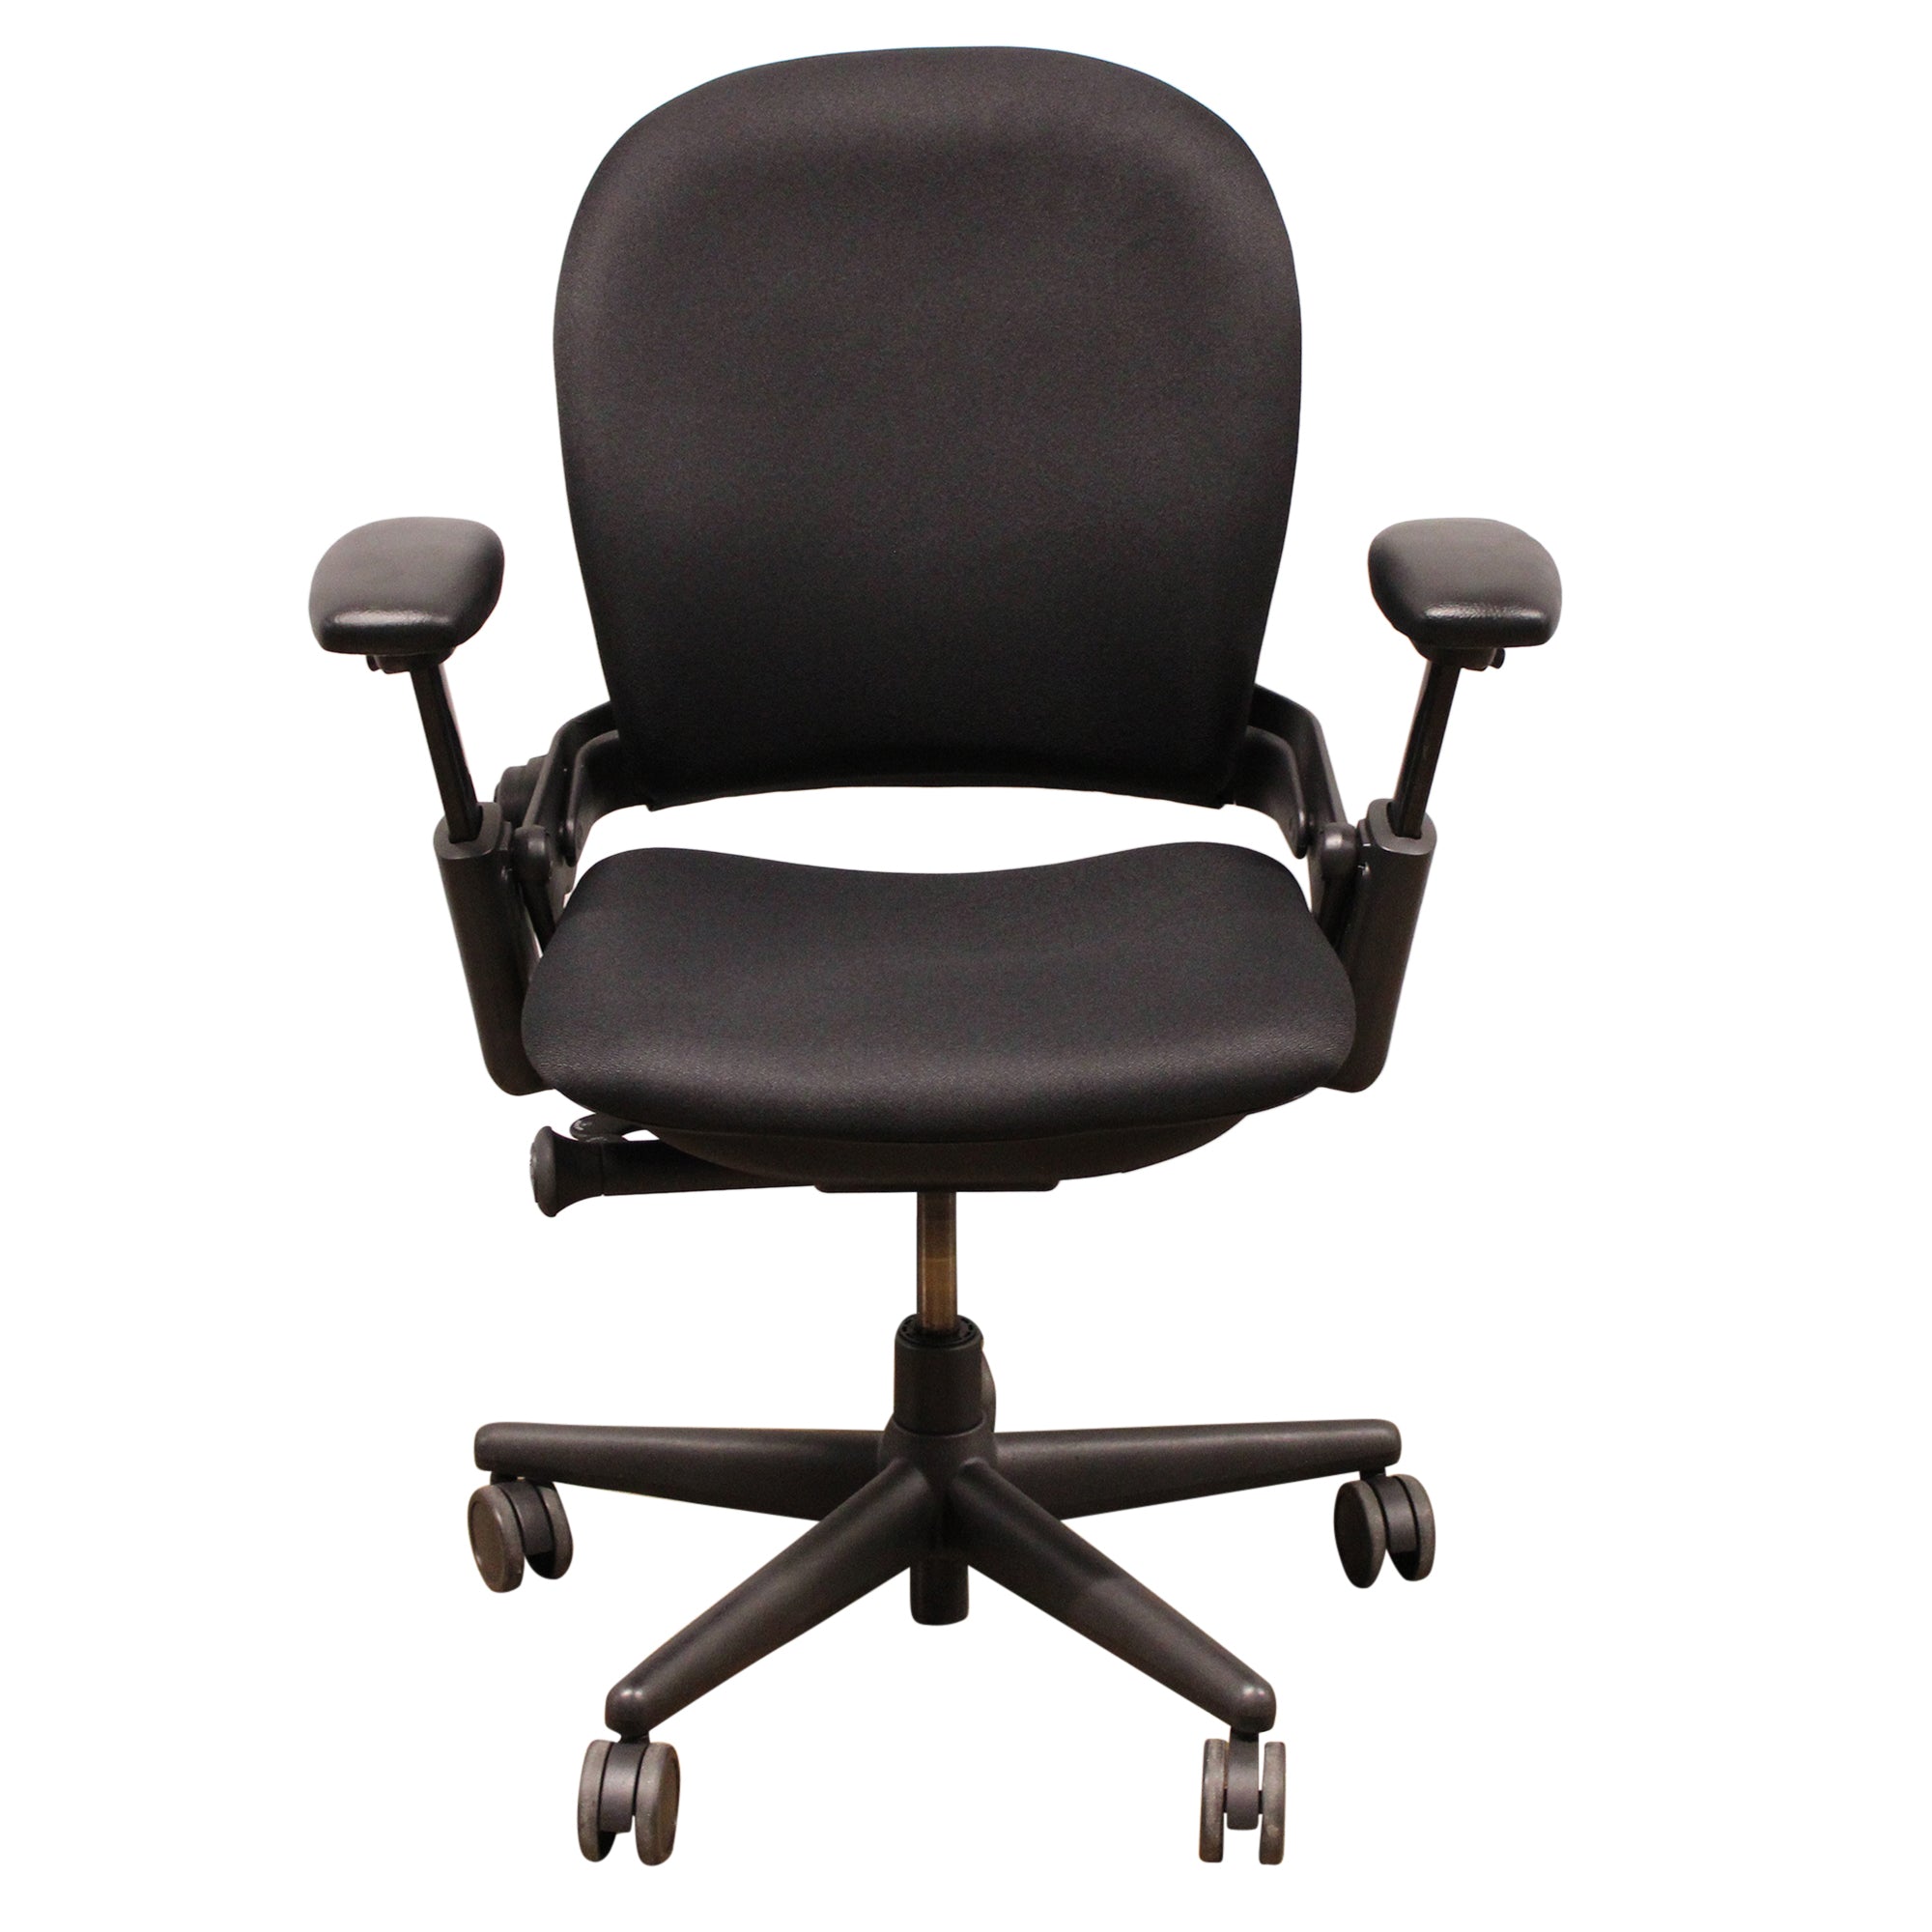 Steelcase Leap V1 Task Chair without adjustable Lumbar or Seat Slide, Black- Preowned